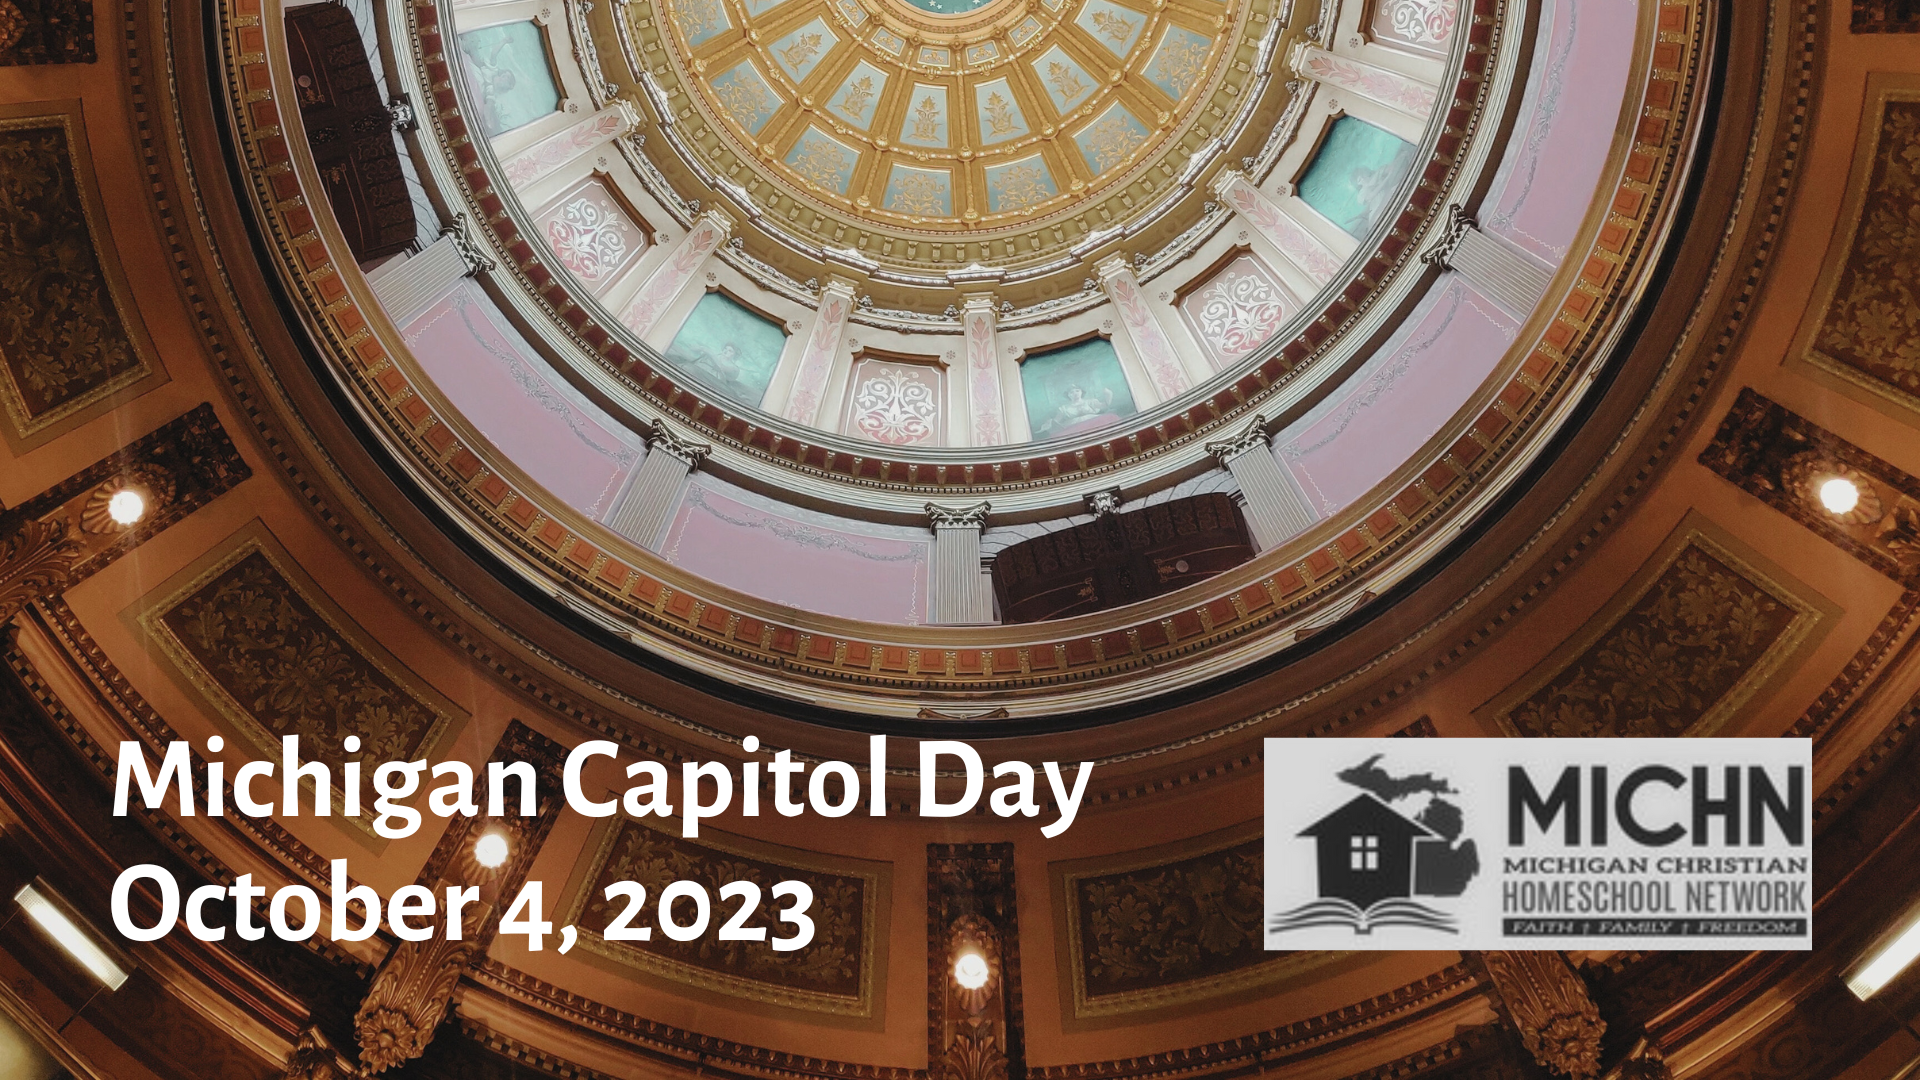 an interior shot the dome of a state capitol building with text that says "Michigan Capitol Day, October 4, 2023"